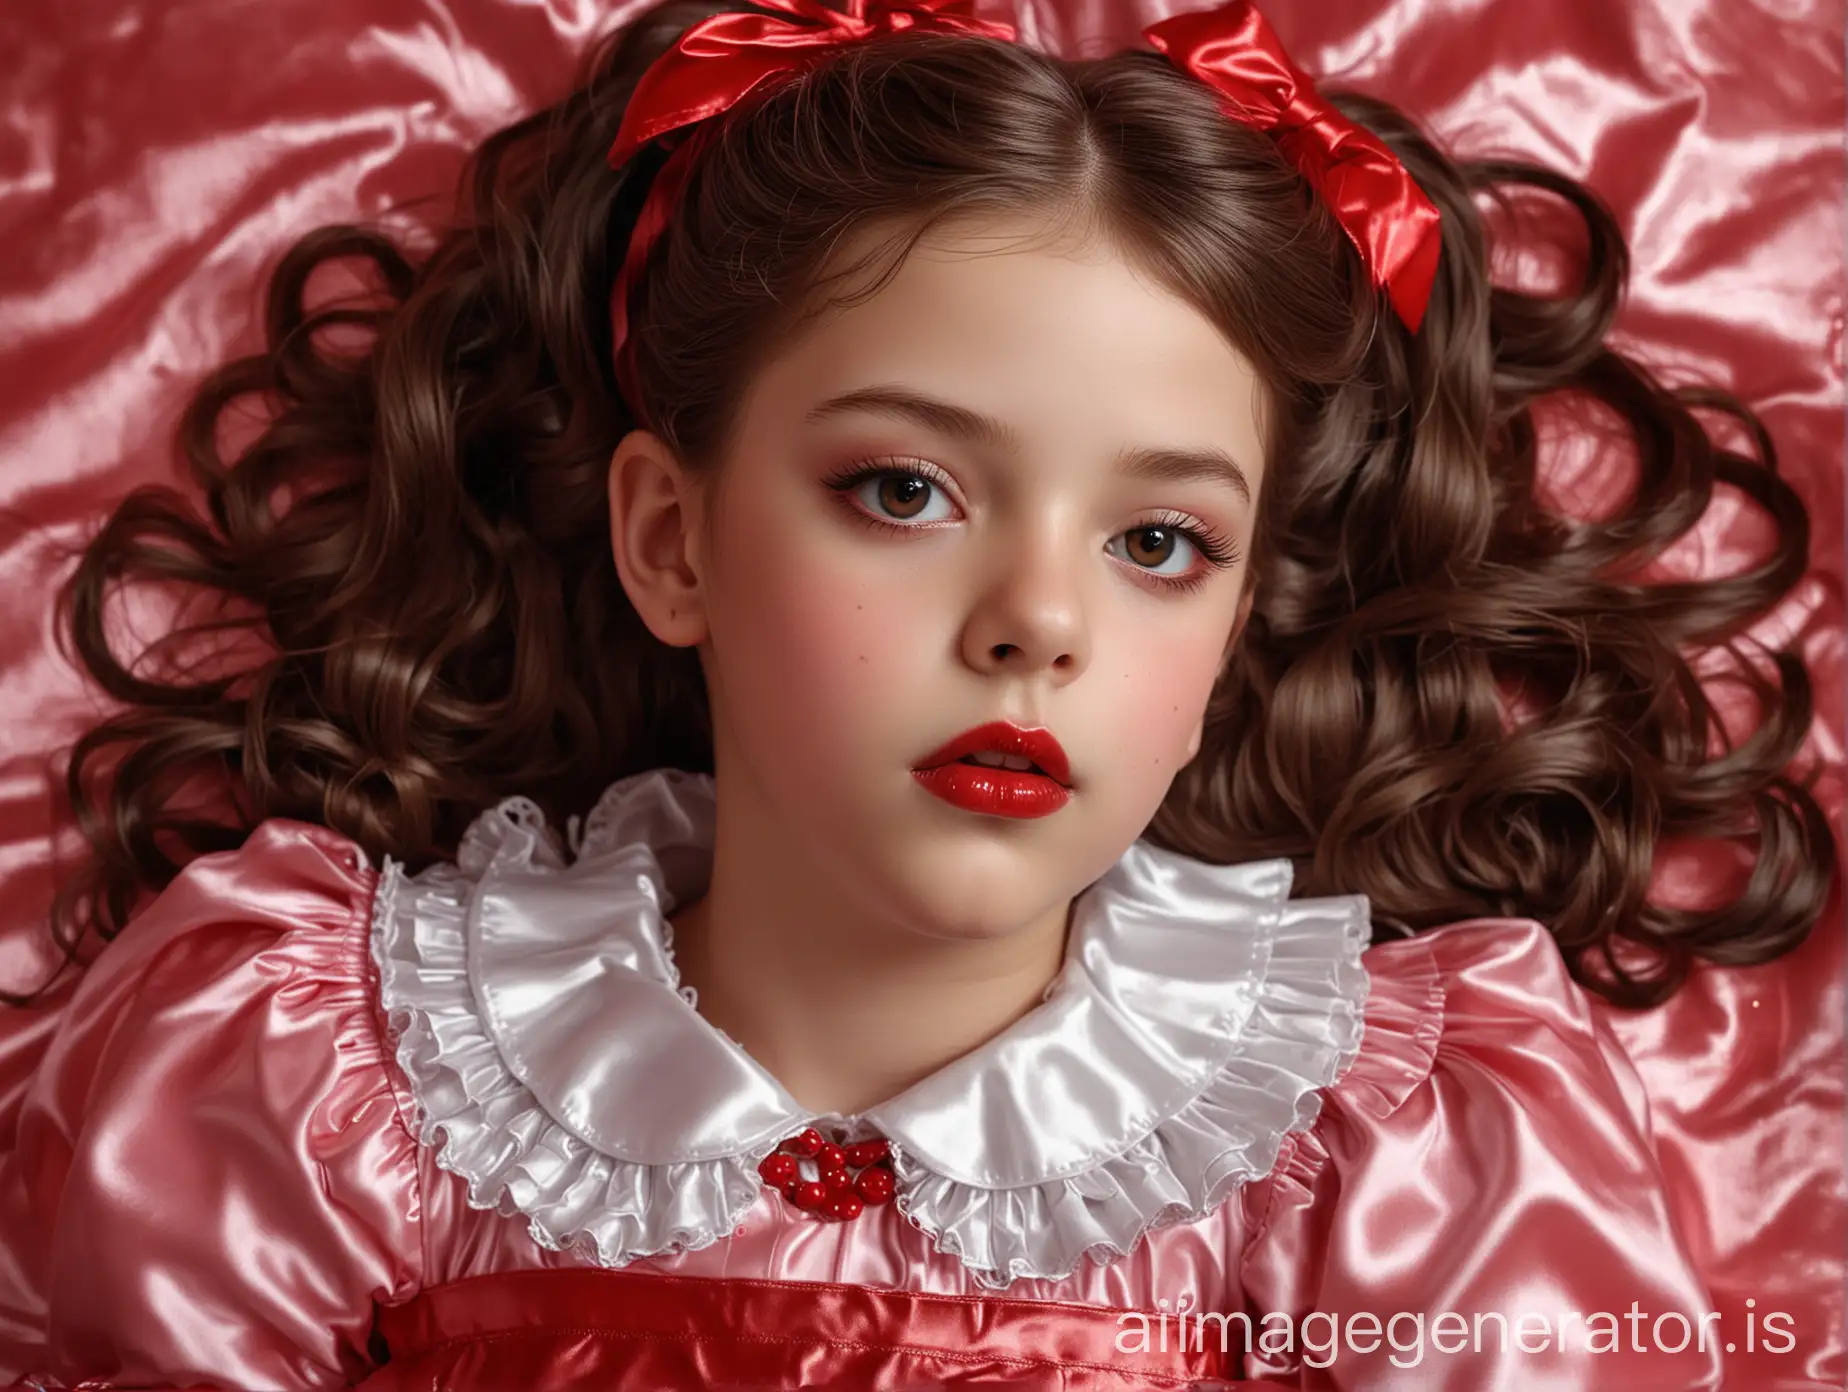 hyperrealistic image in the highest quality. 10 year old french girl. big darkbrown eyes. a lot of red lipgloss. she is lying on shiny satin sheets. she is wearing an extremely shiny satin sweet lolita outfit. collared and fully closed up. shiny ribbon over the collar, big shiny lolita ribbon in the hair over the dress she wears a shiny latex pinafore.